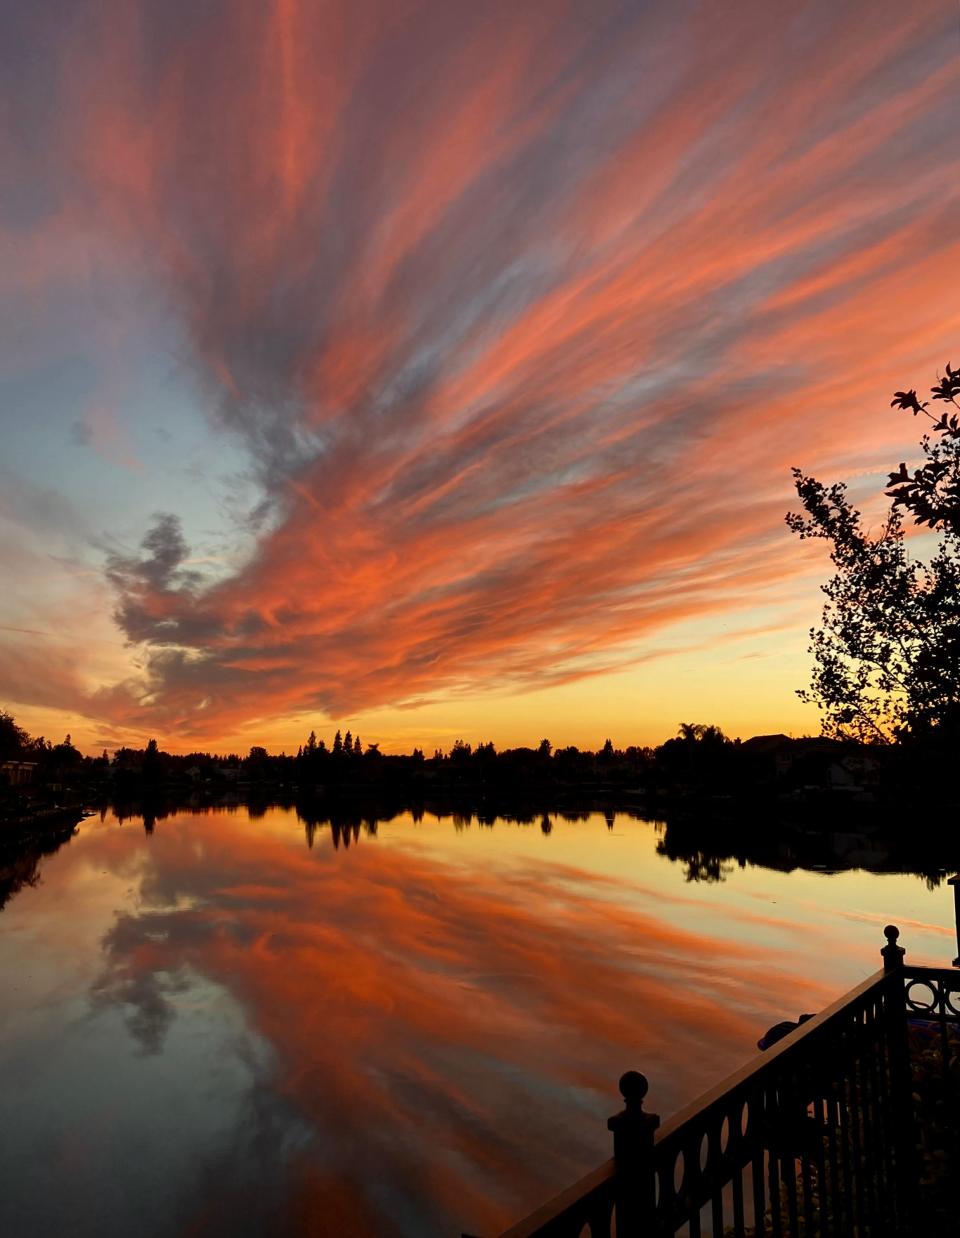 Gregory Alves of Stockton used an Apple iPhone 8 to photograph over Brookside Lake in Stockton.